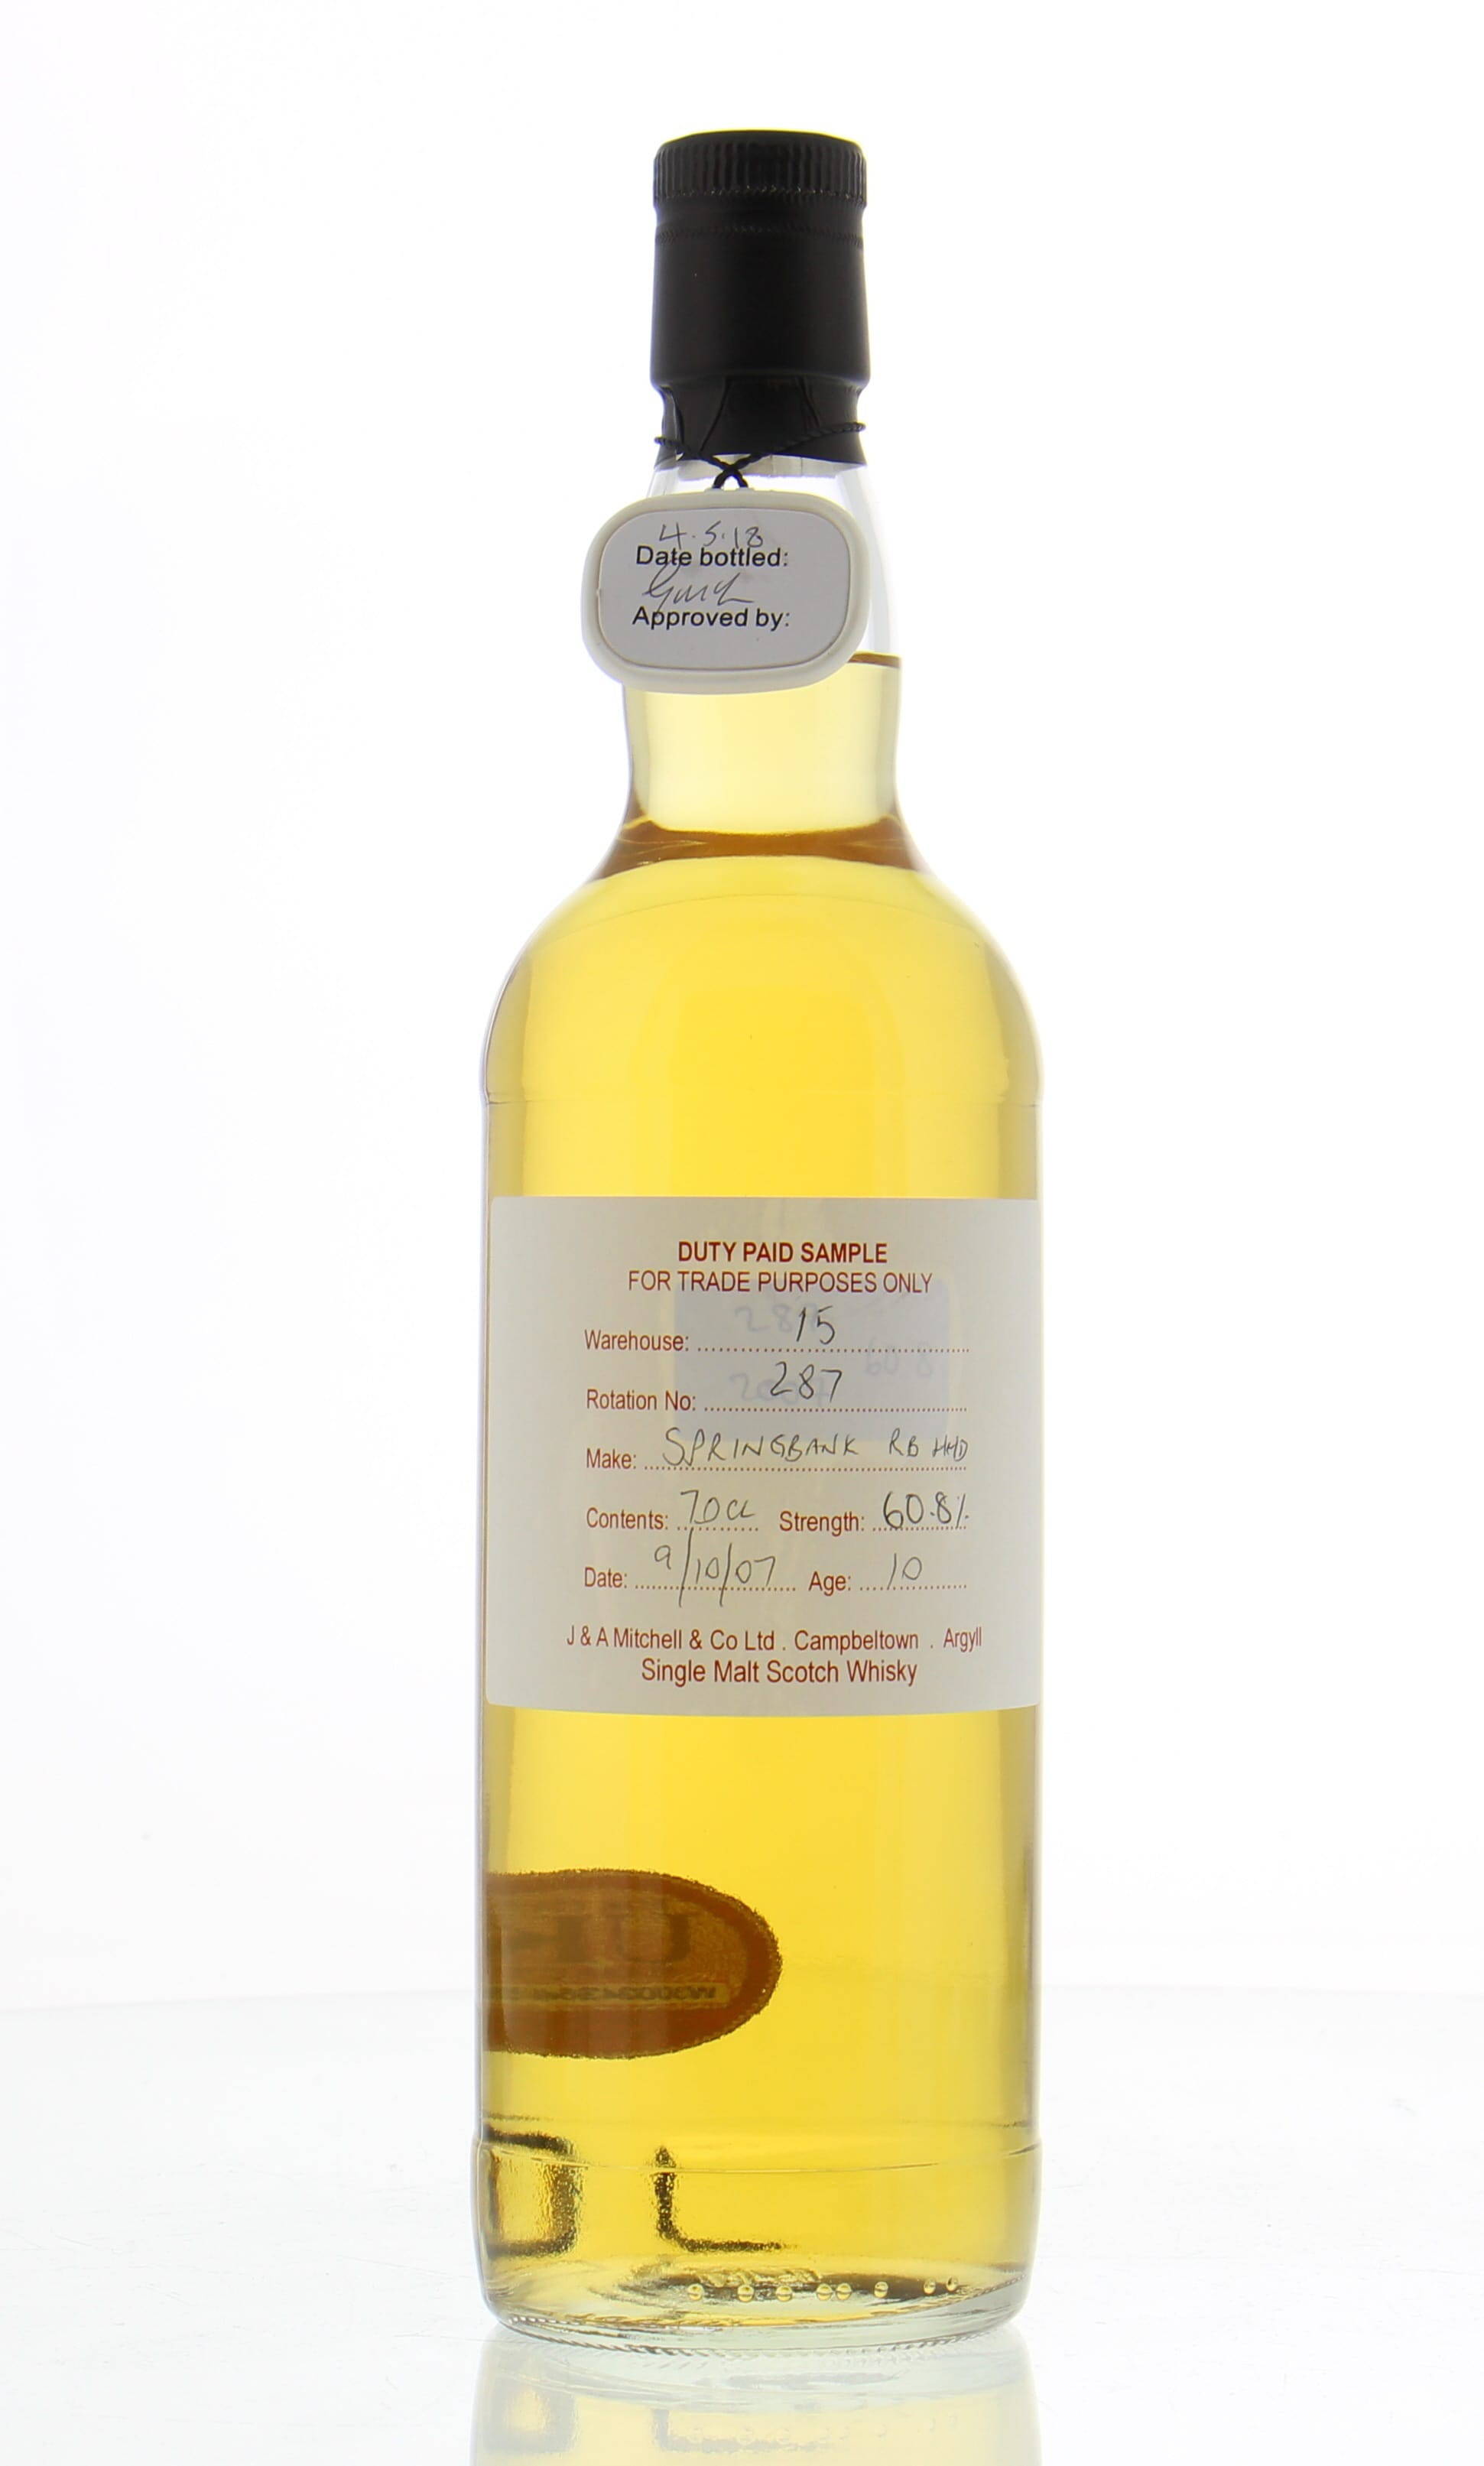 Springbank - 10 Years Old Duty Paid Sample Warehouse 15 Rotation 287 60.8% 2007 Perfect